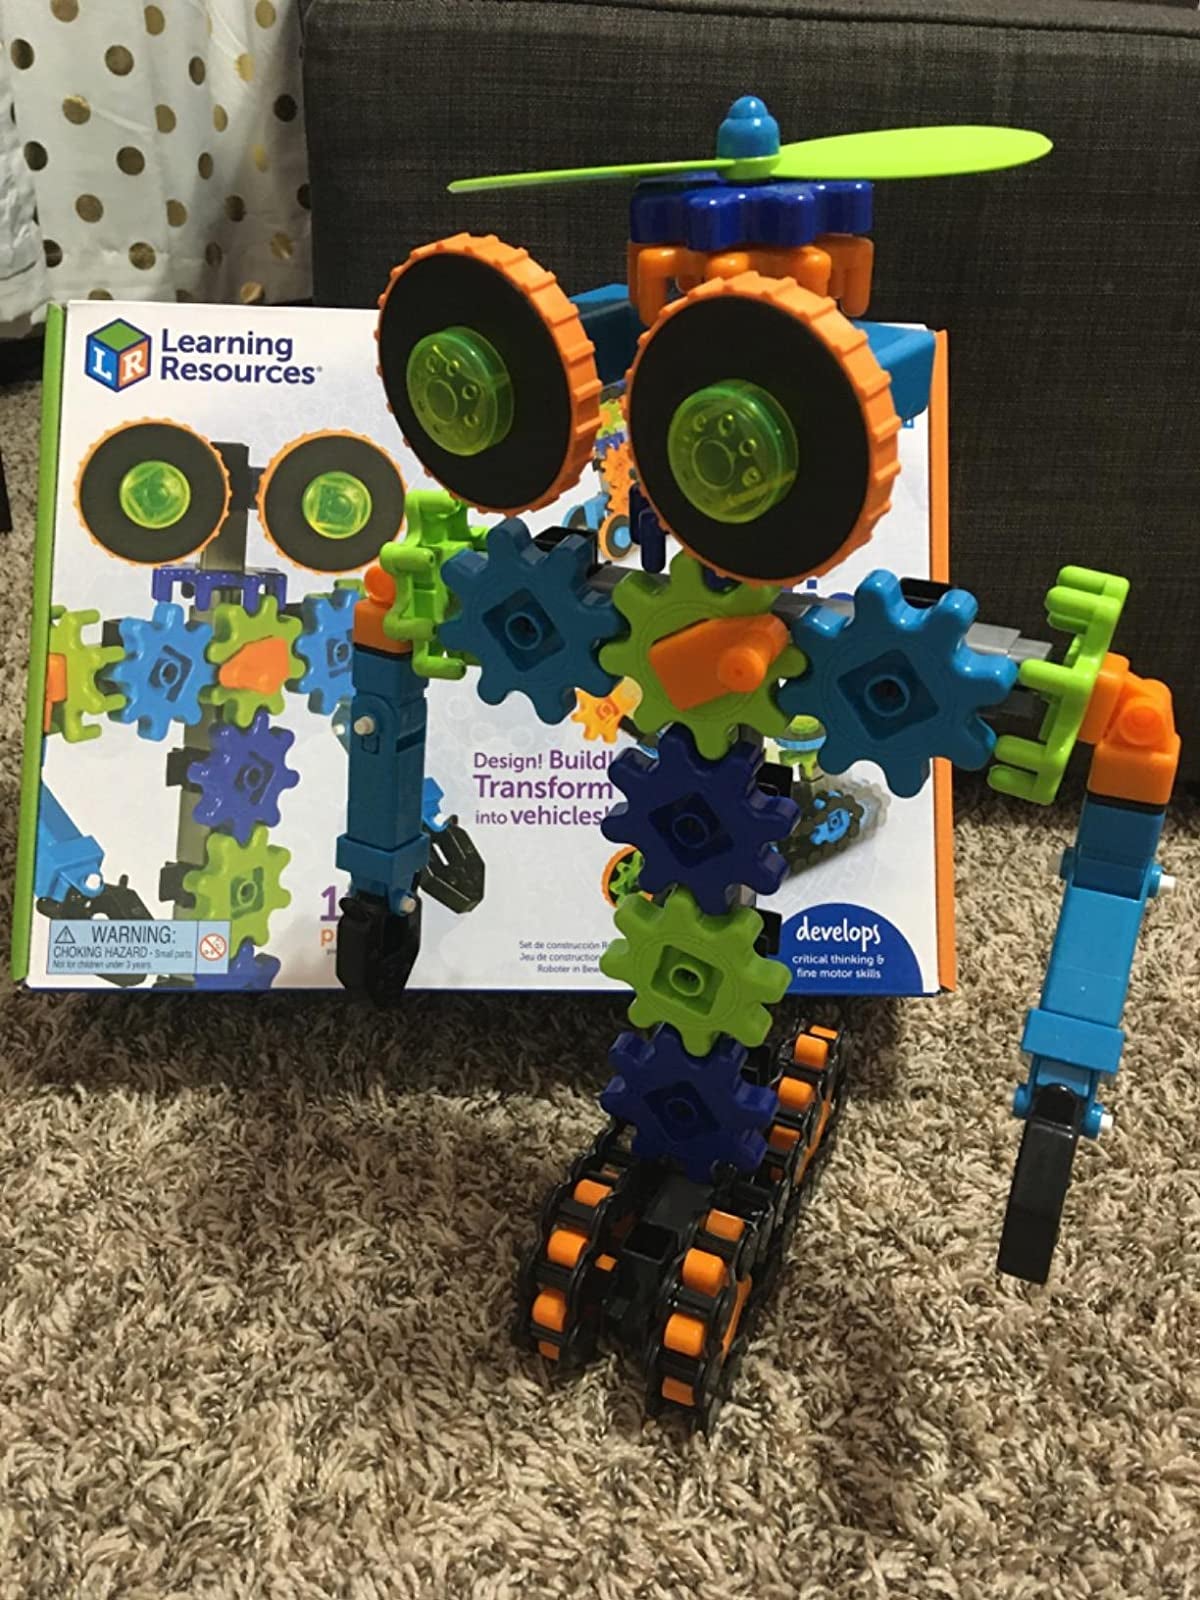 Reviewer's image of colorful plastic robot toy and packaging